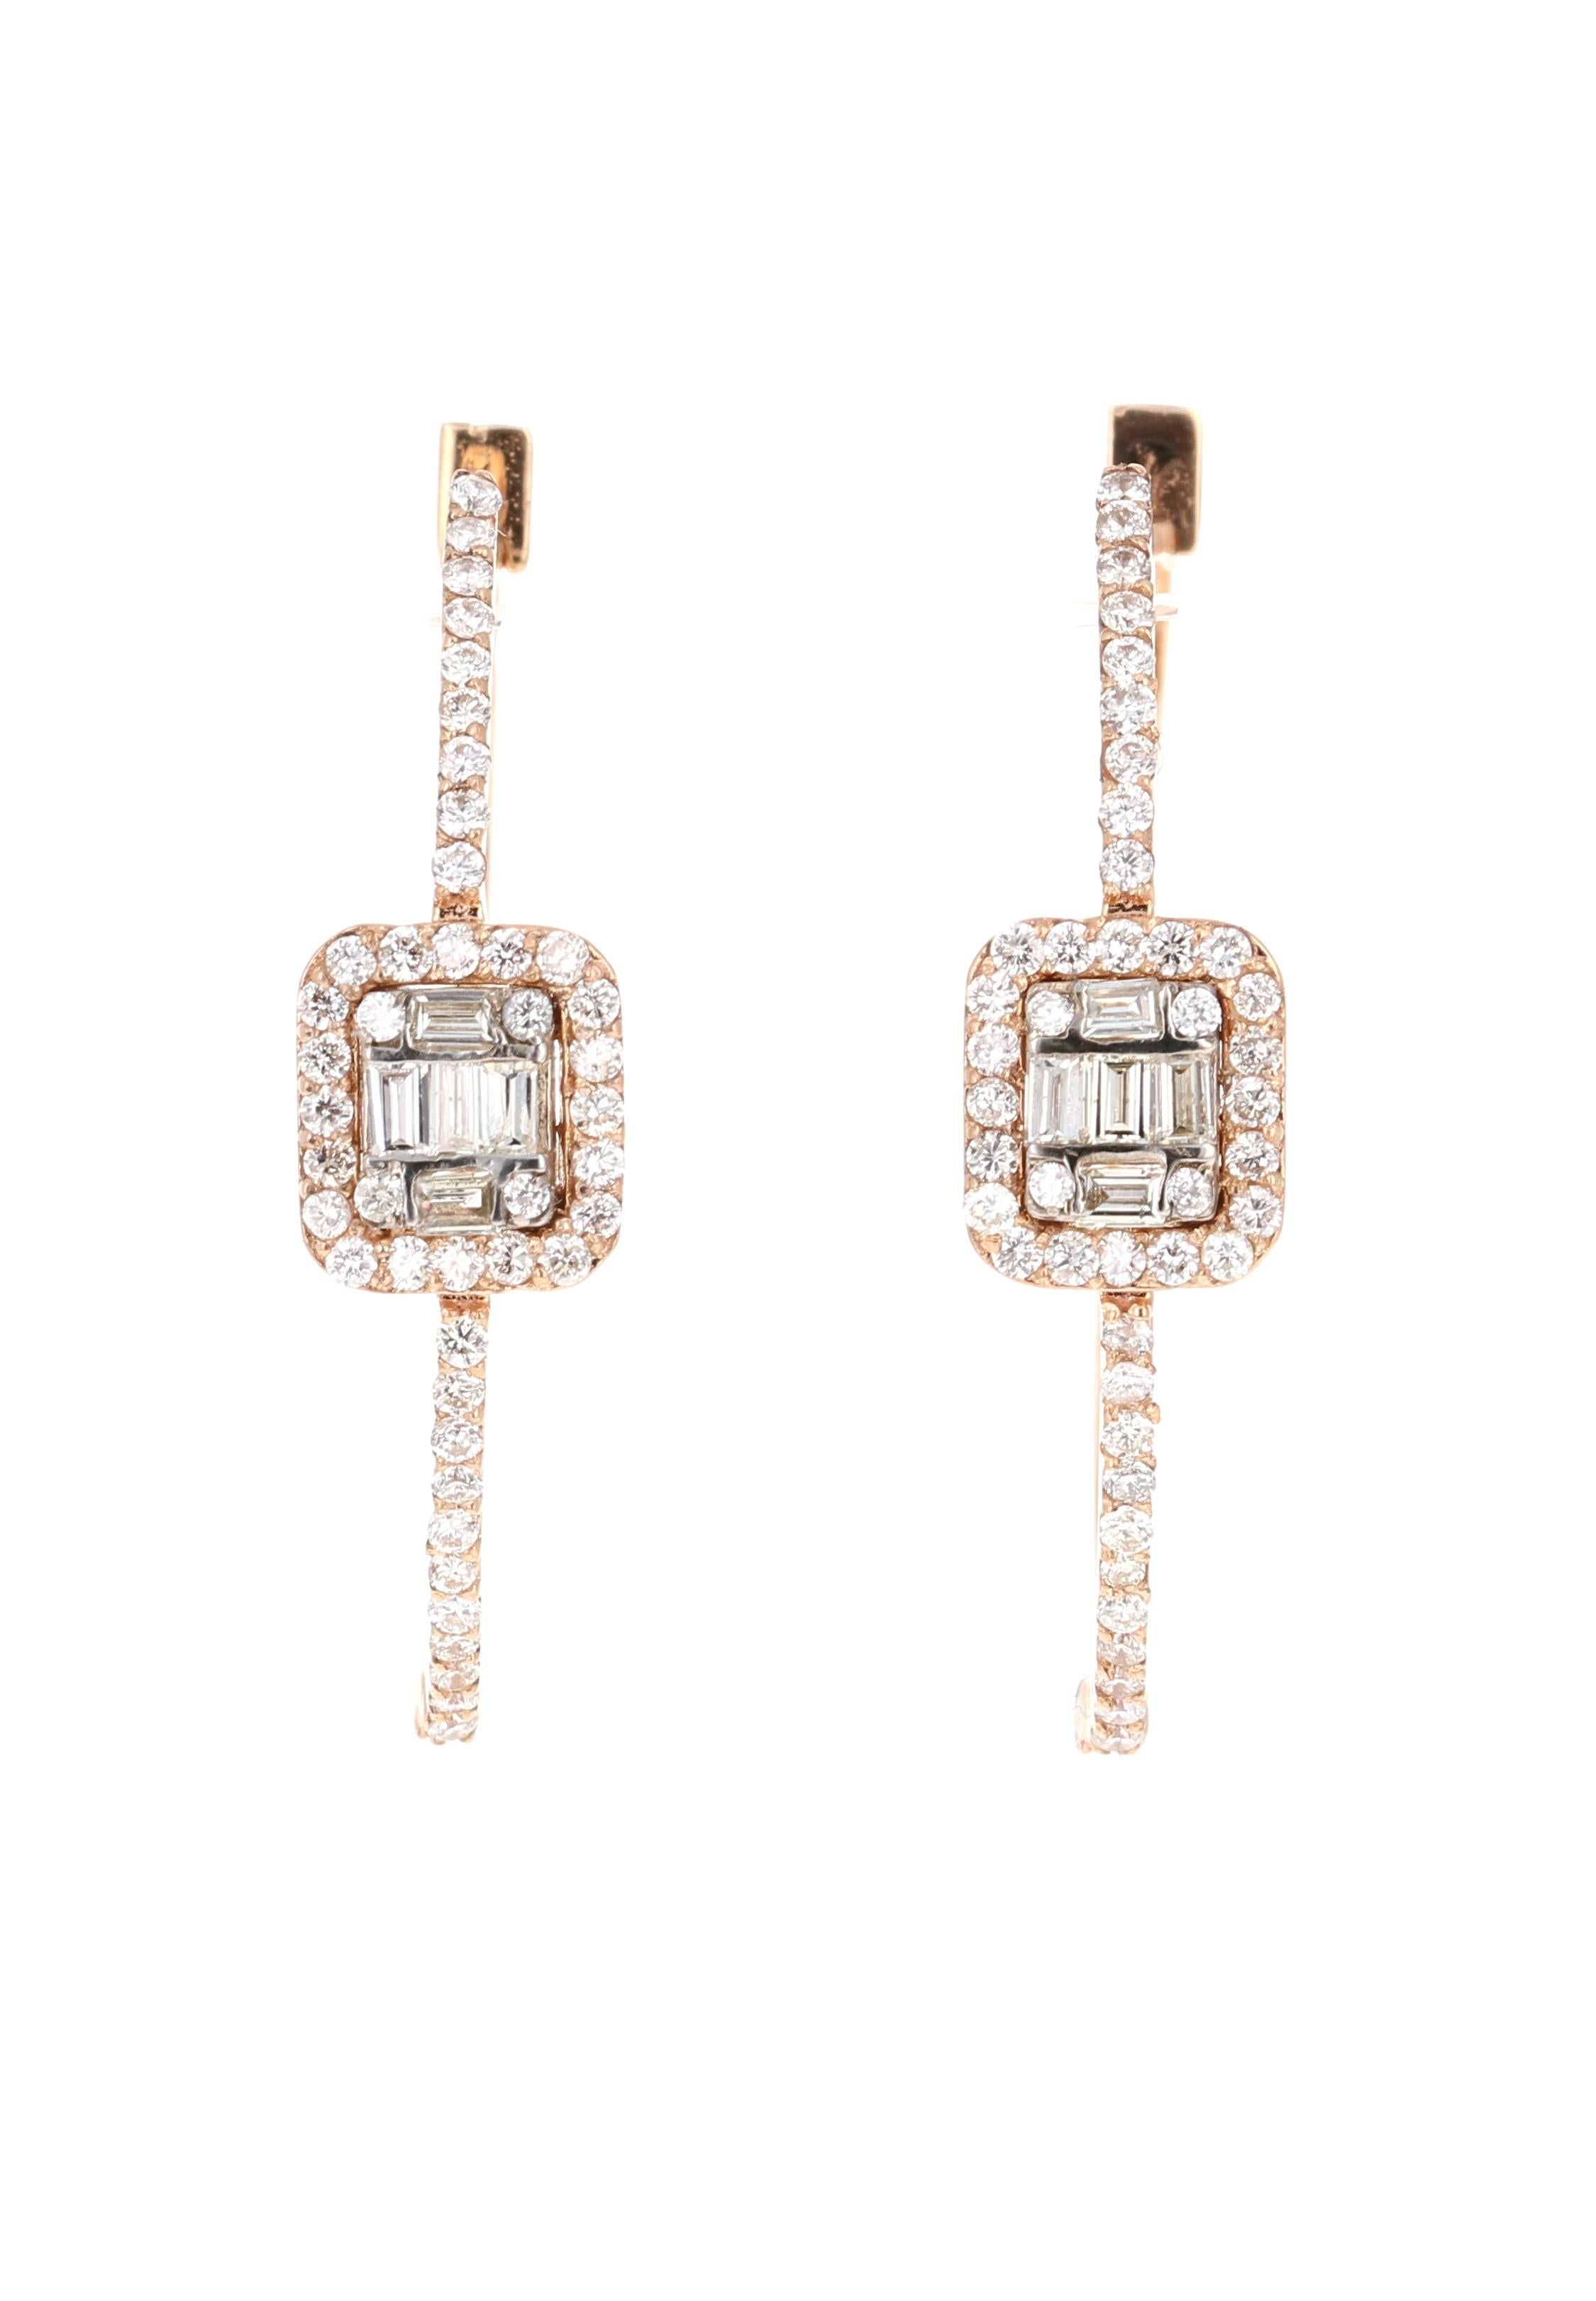 86 Round Cut Diamonds/0.58 Carats
16 Baguette Cut Diamonds/0.25 Carats

18 Karat Rose Gold, 4.2 grams 

1.25 inches long and approximately 0.50 inch wide